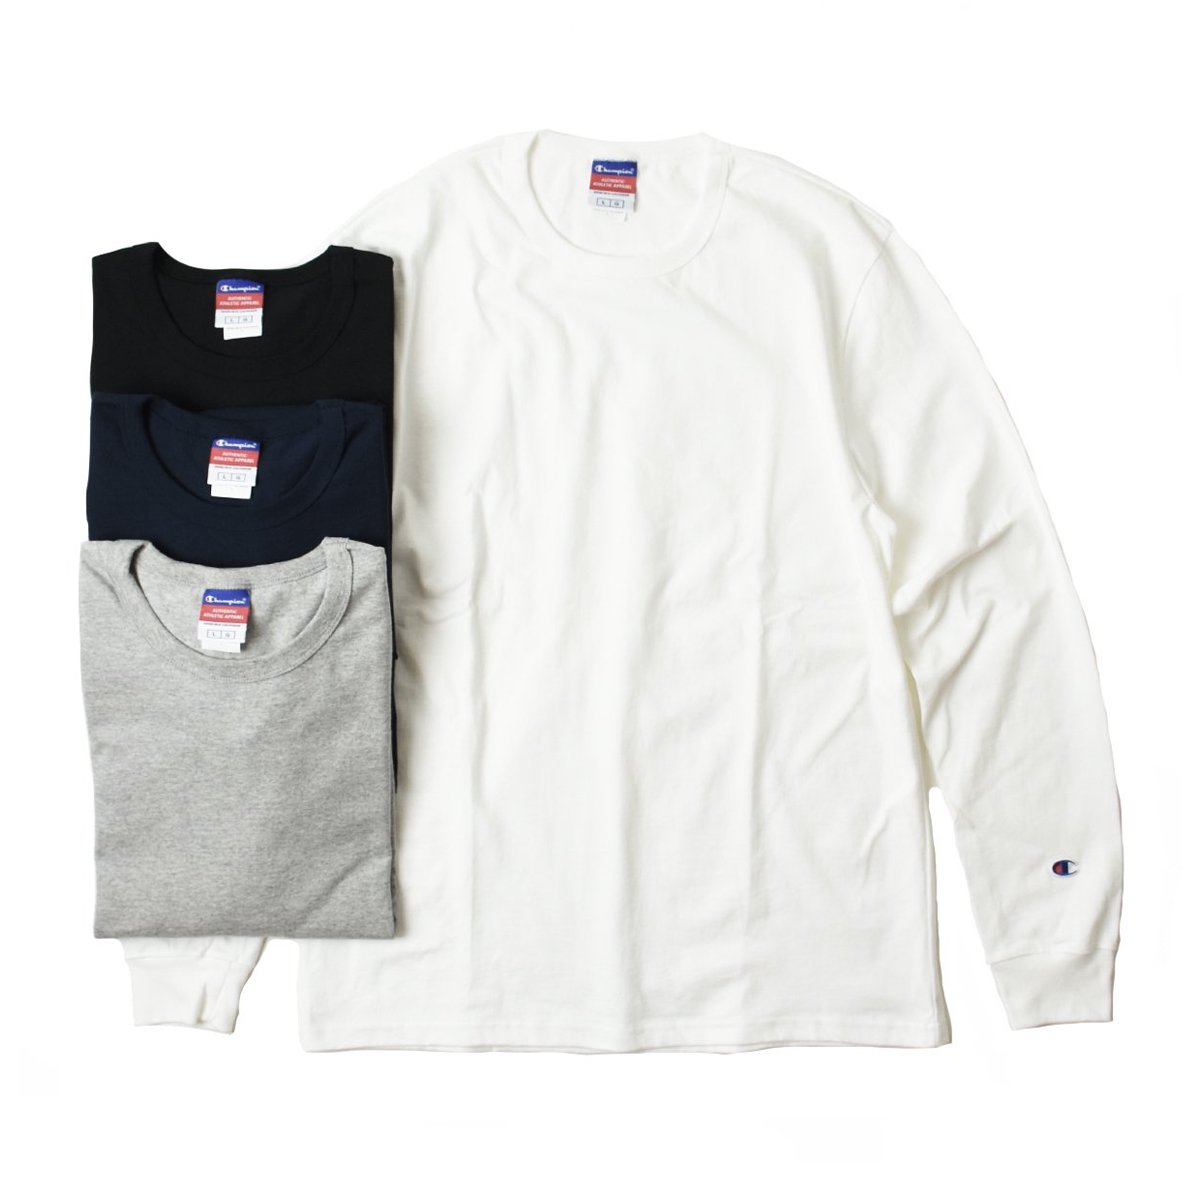 【Champion U.S.A.】7.0 OZ Heritage Jersey L/S Tee (4Color)
                          </a>
            <span class=